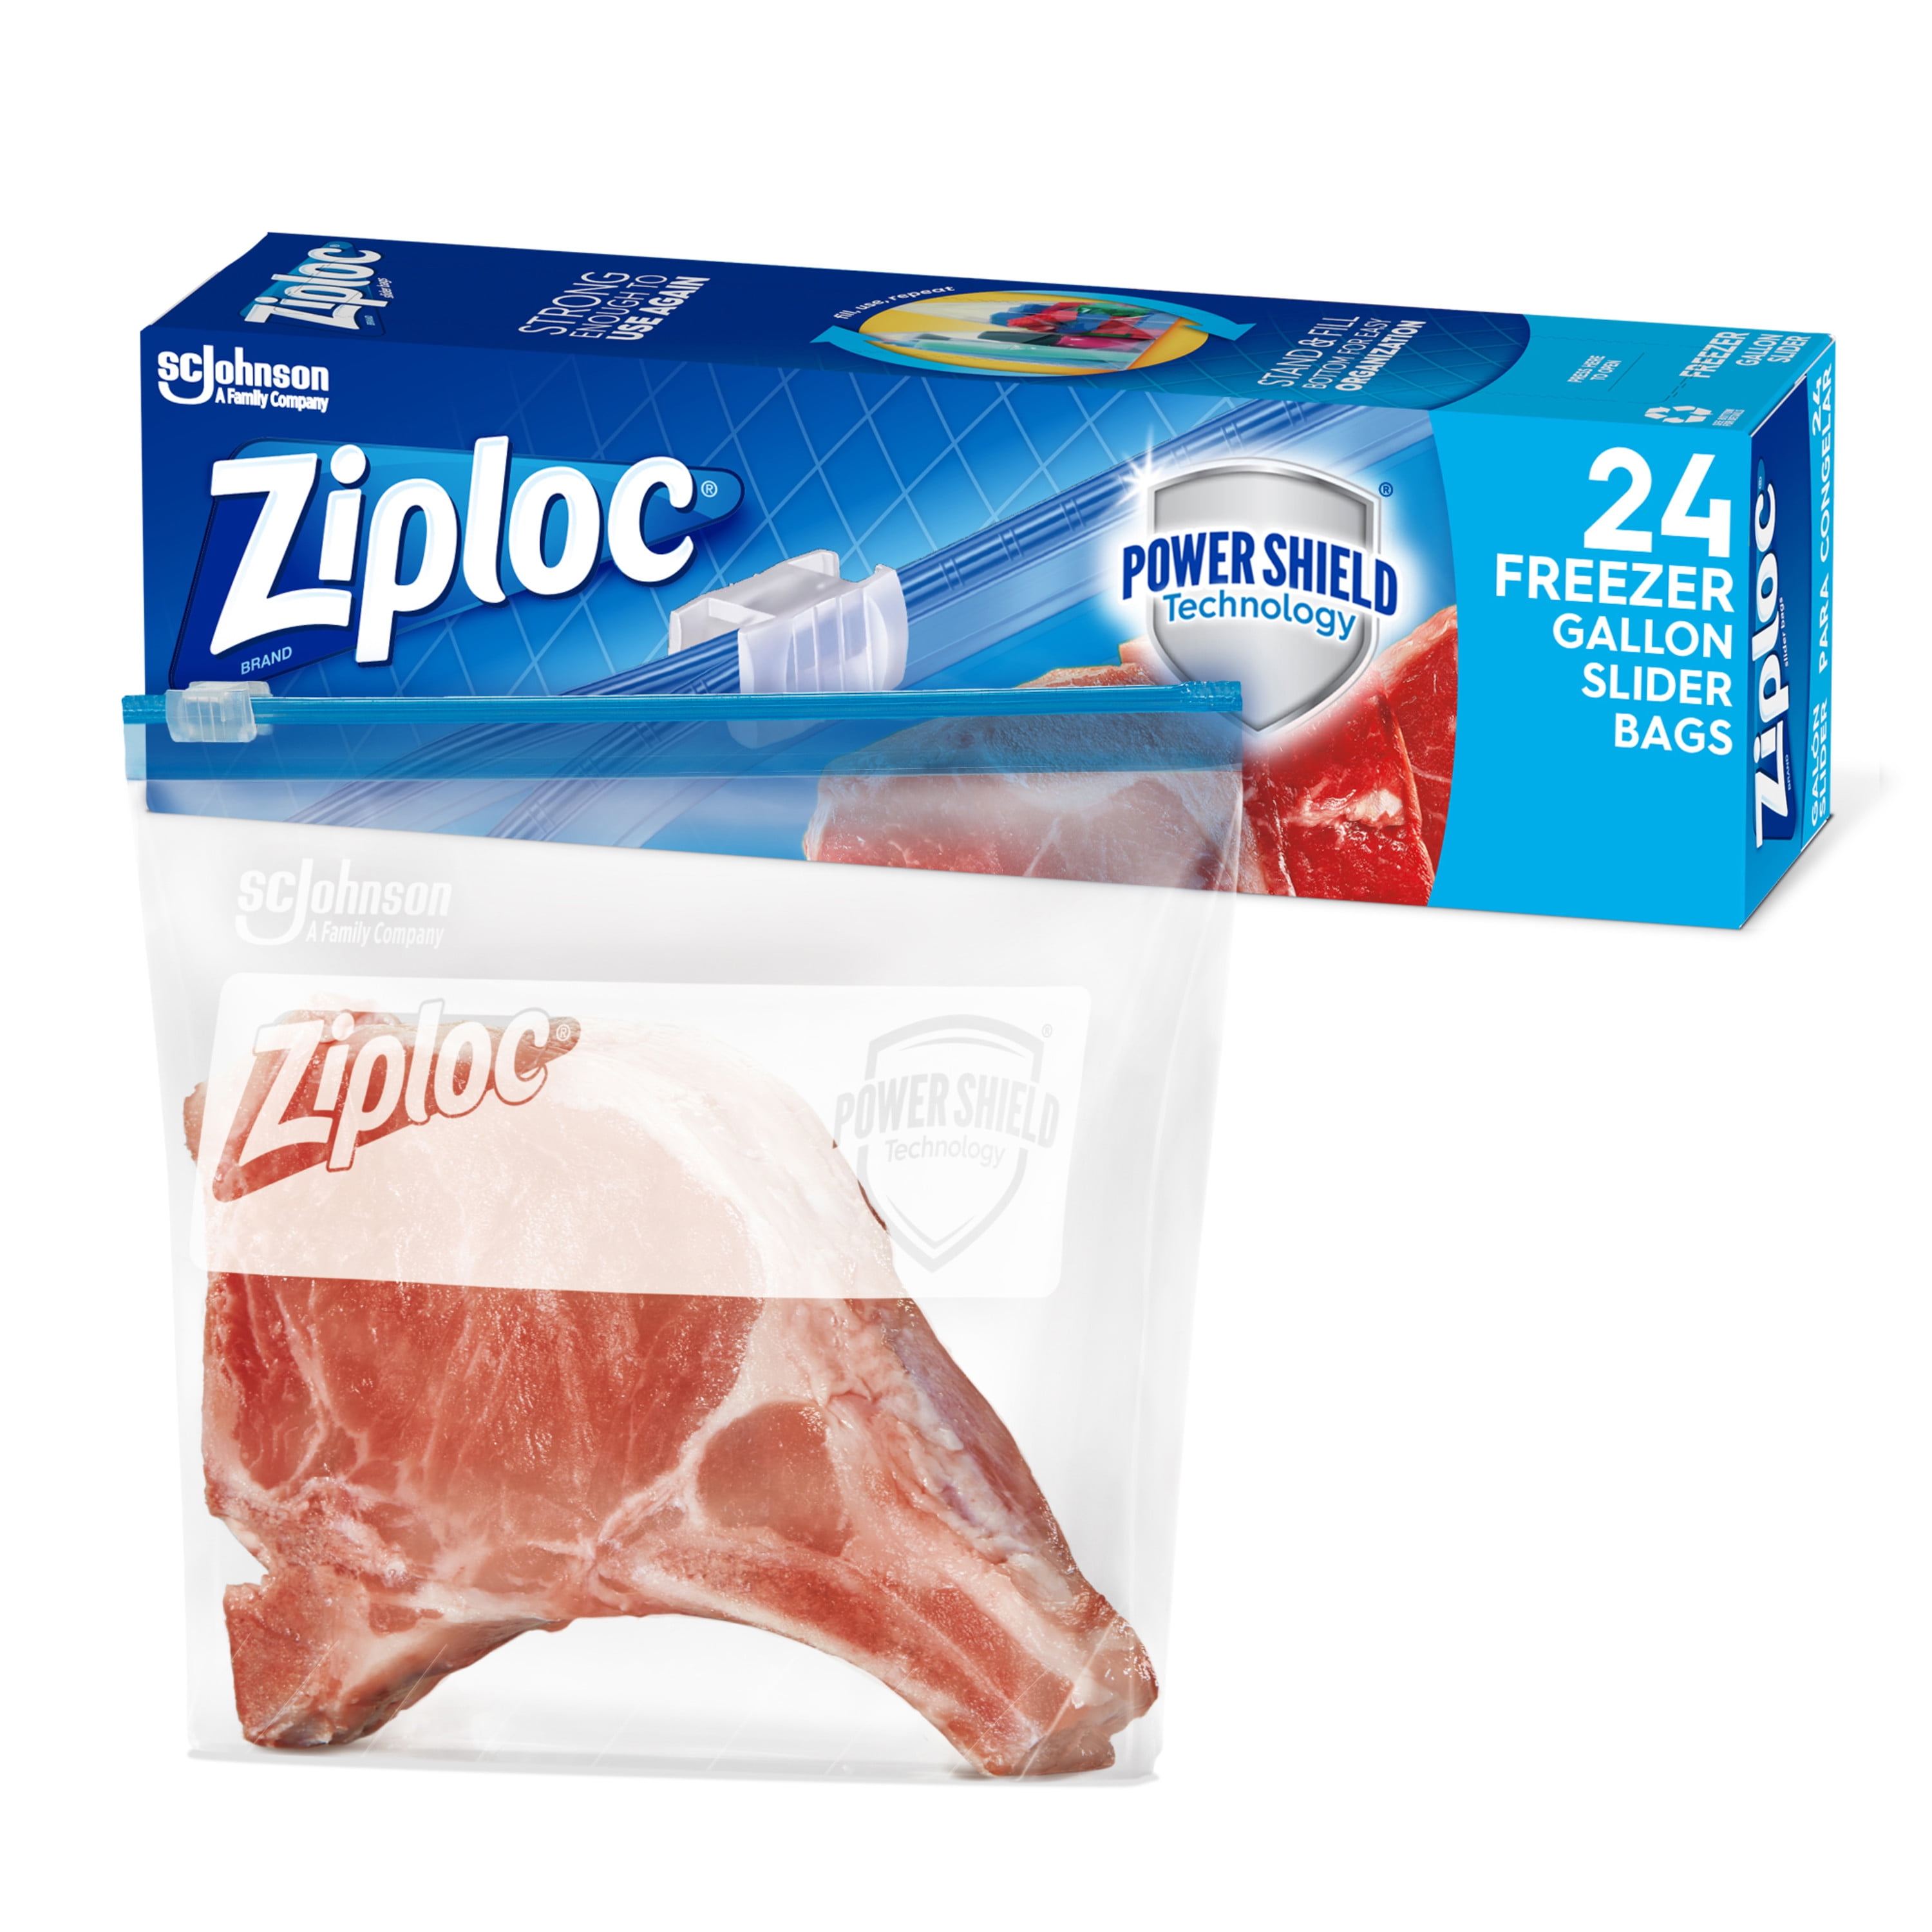 Ziploc® Brand Freezer Bags Two Gallon /XL Review RealReviews 4Real Products  CommonScentsy 